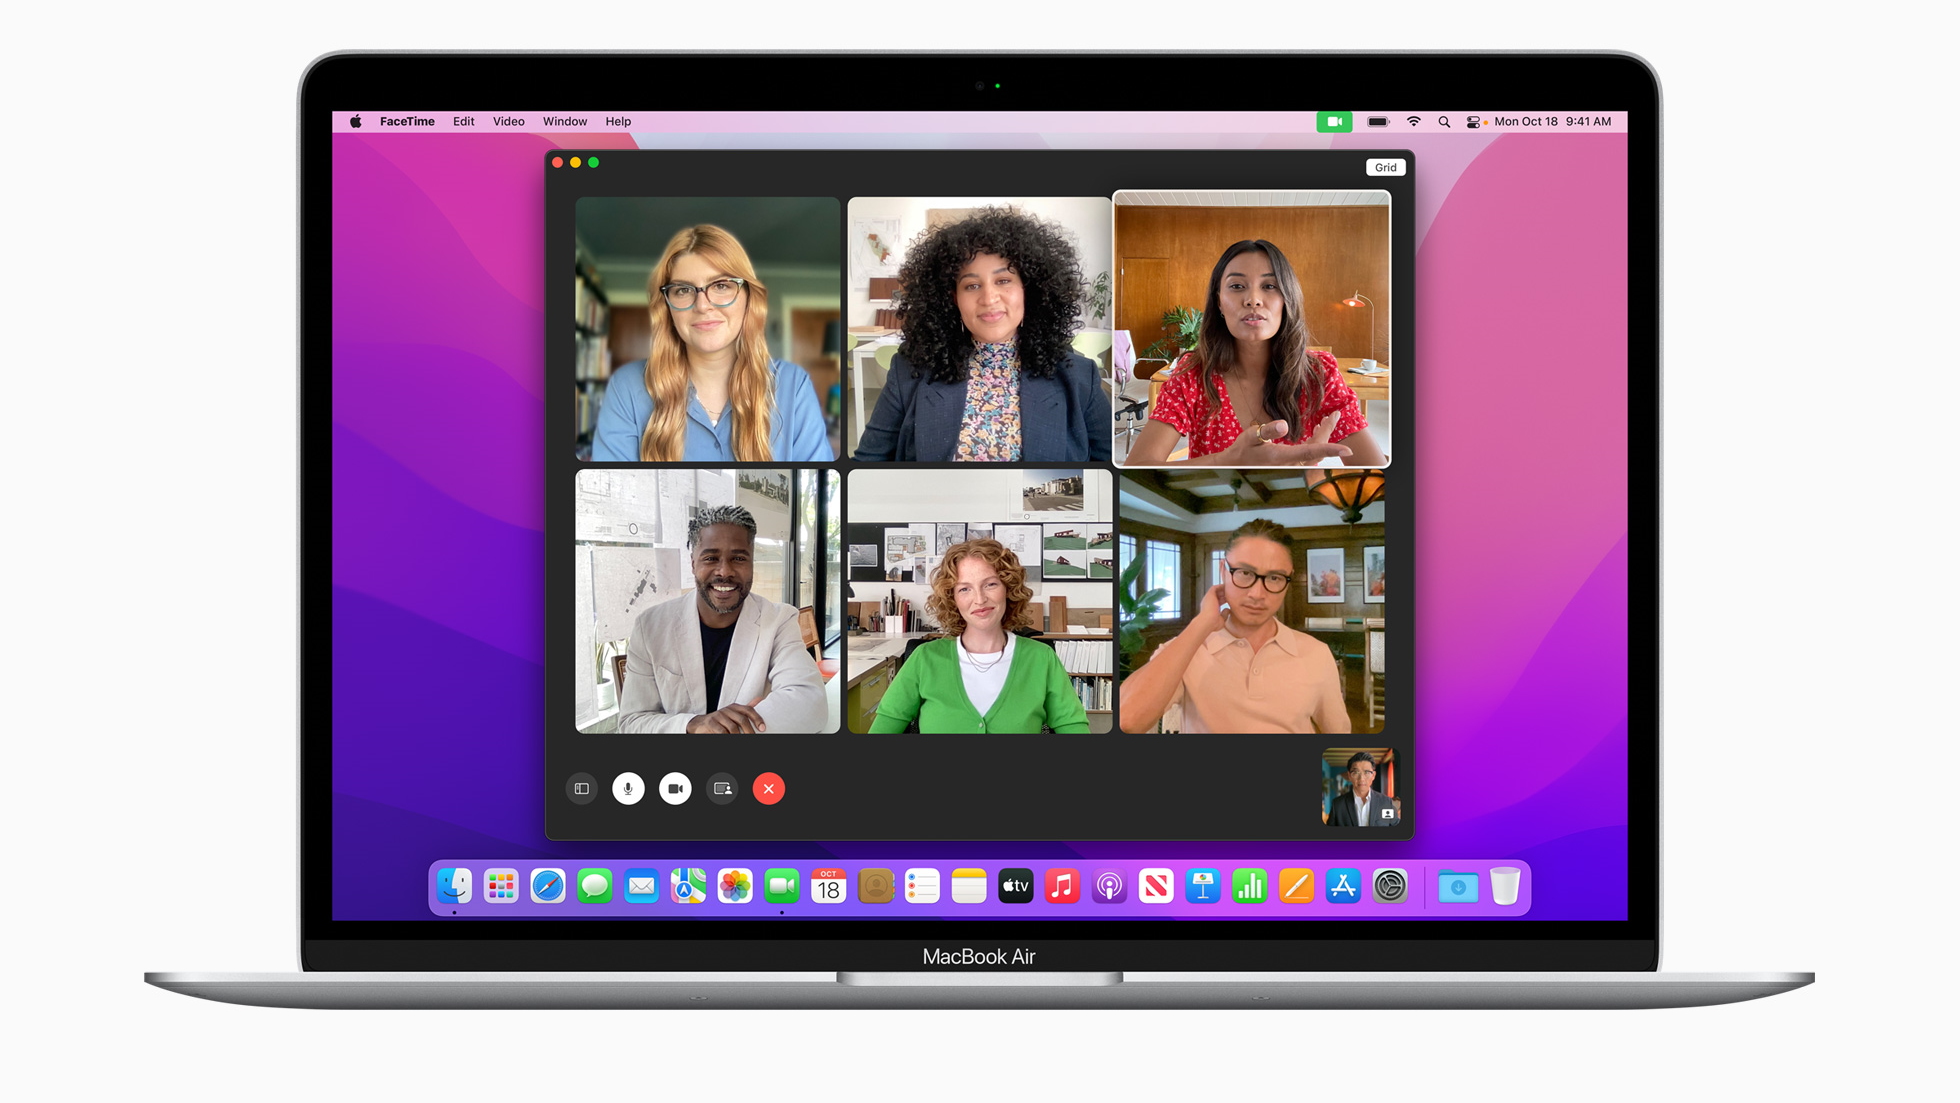 problems with macos monterey